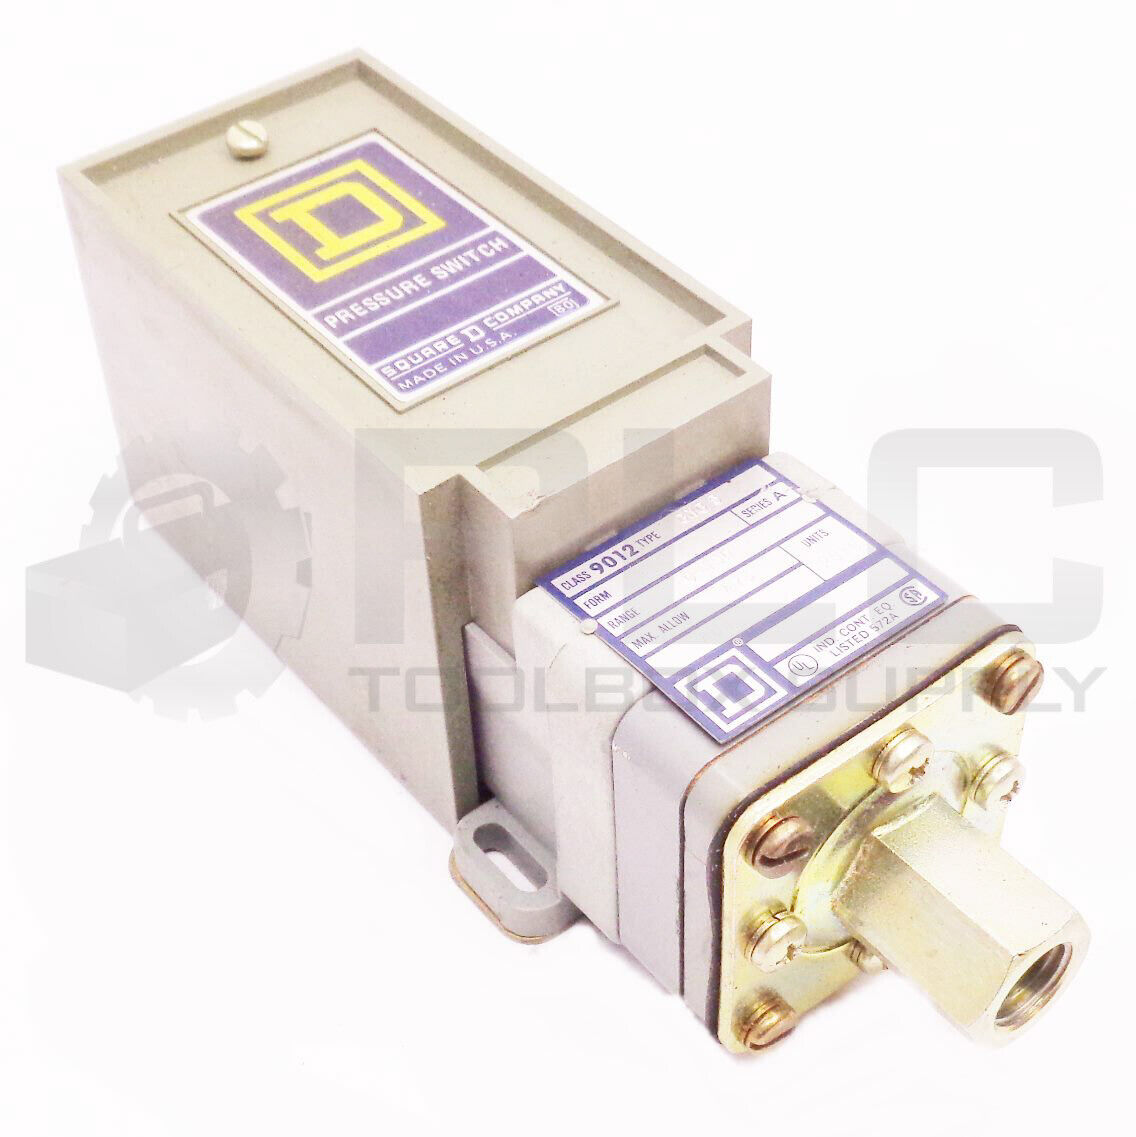 NEW SQUARE D 9012 GNG5 SER A PRESSURE SWITCH 9012 GNG 5 9012 GNG-5